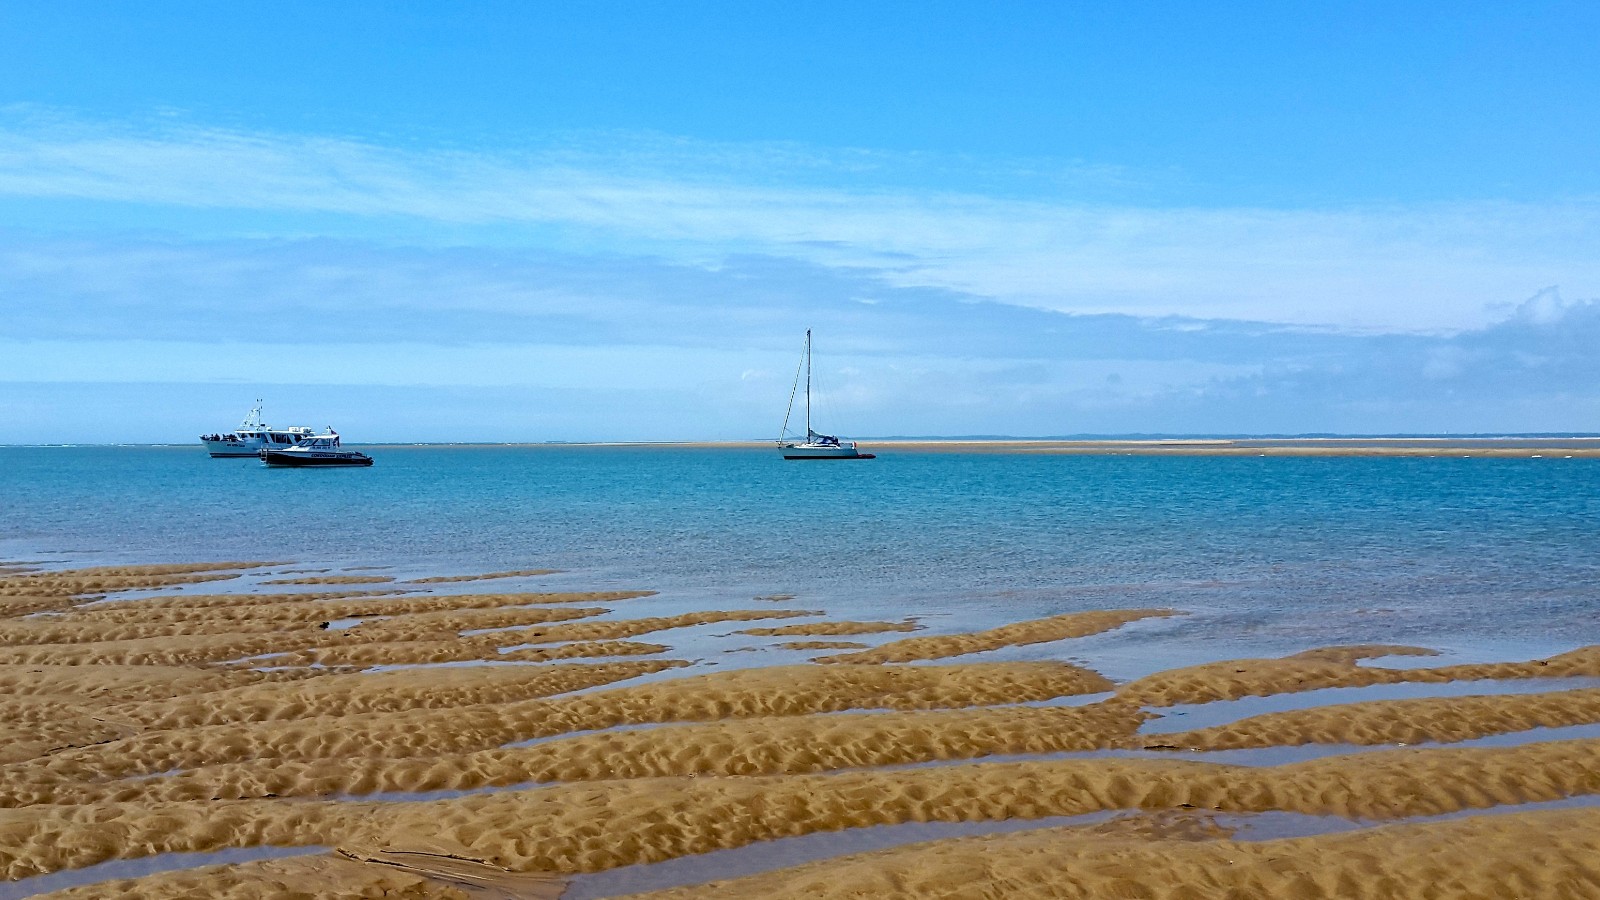 tide out on a golden sandy beach with a boat on the blue water